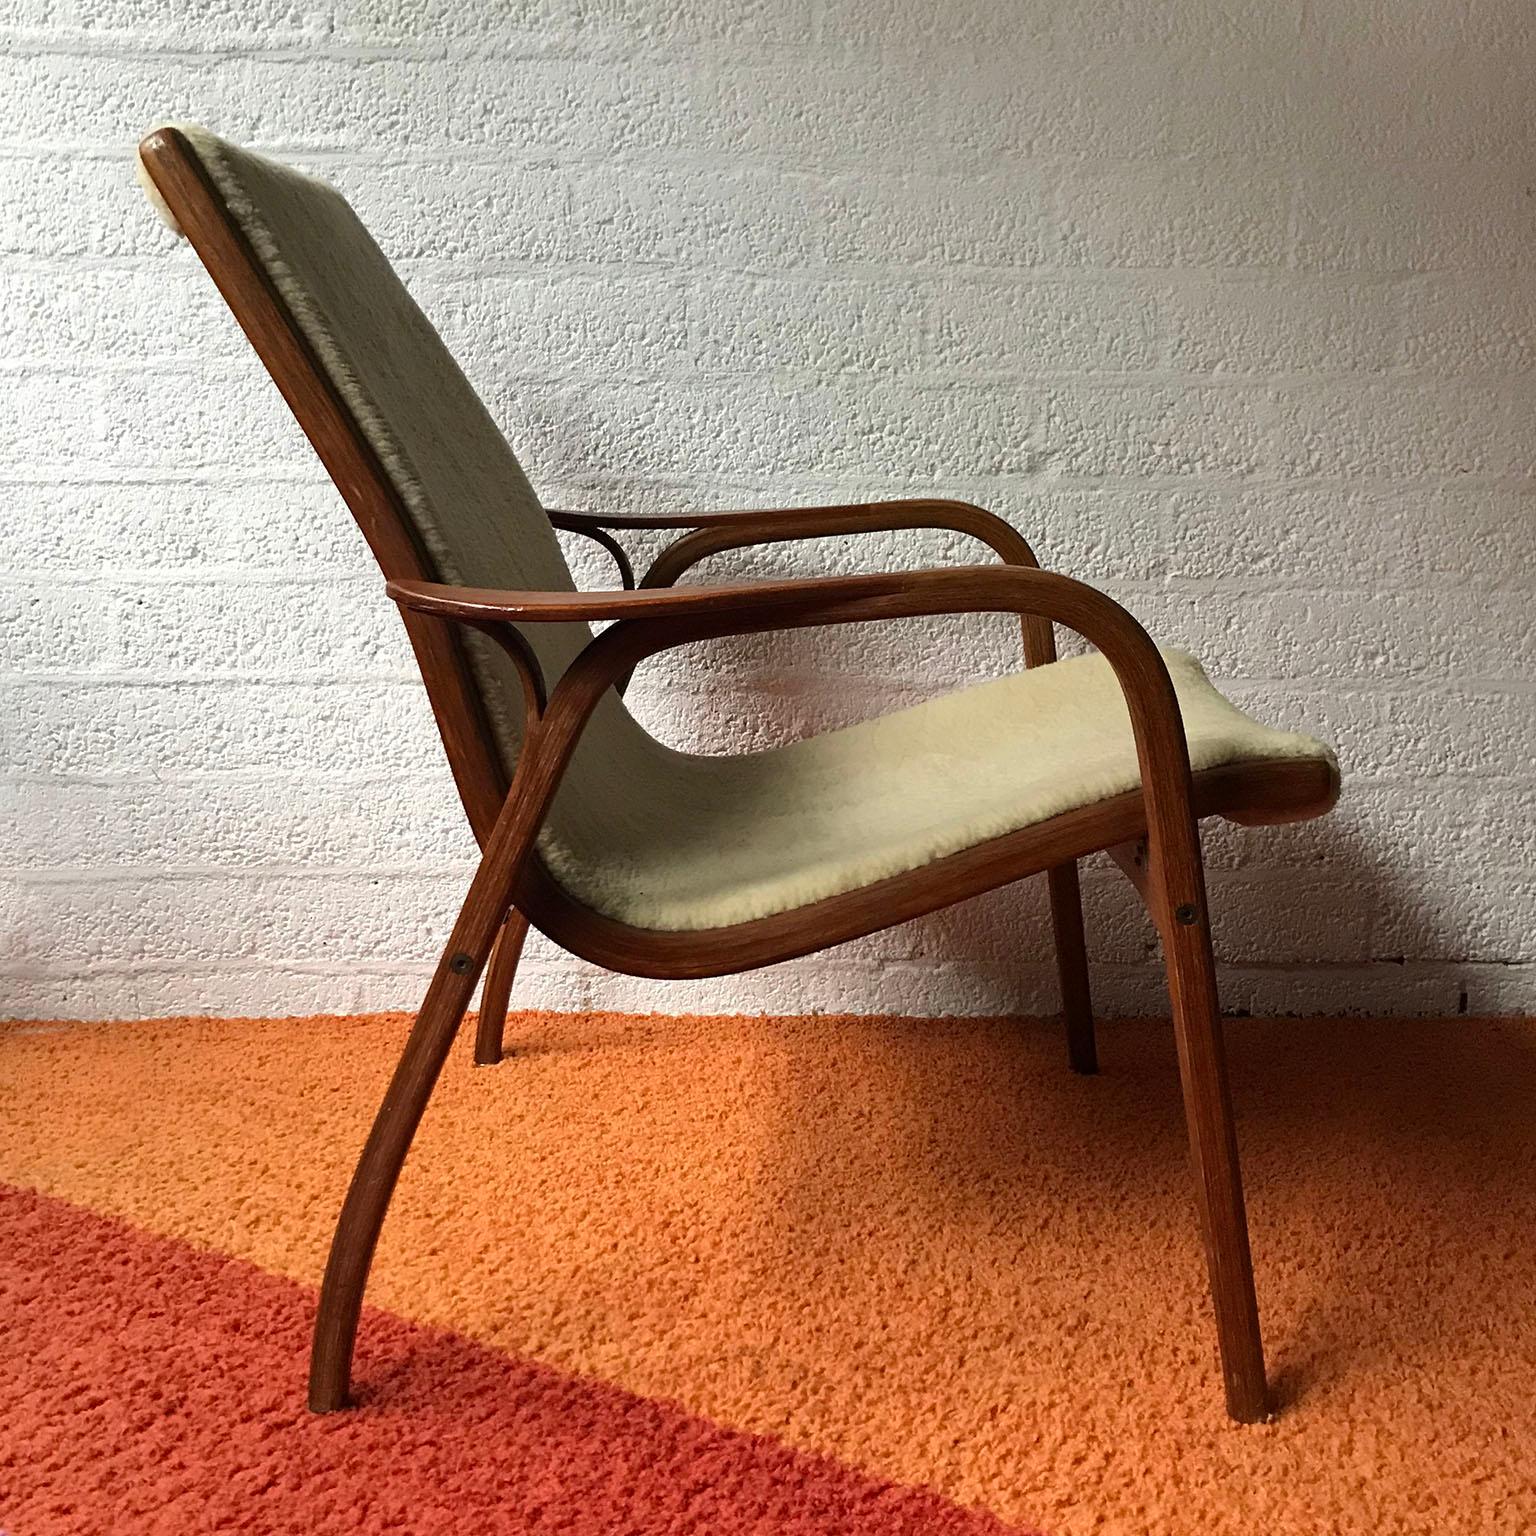 Beautiful wooden chair. The chair has a beautiful design with bended details and sheepskin upholstery. The chair shows some minor traces of wear and is missing a little chip of one of the legs (picture #18) and a spot on the other leg (#17).

The